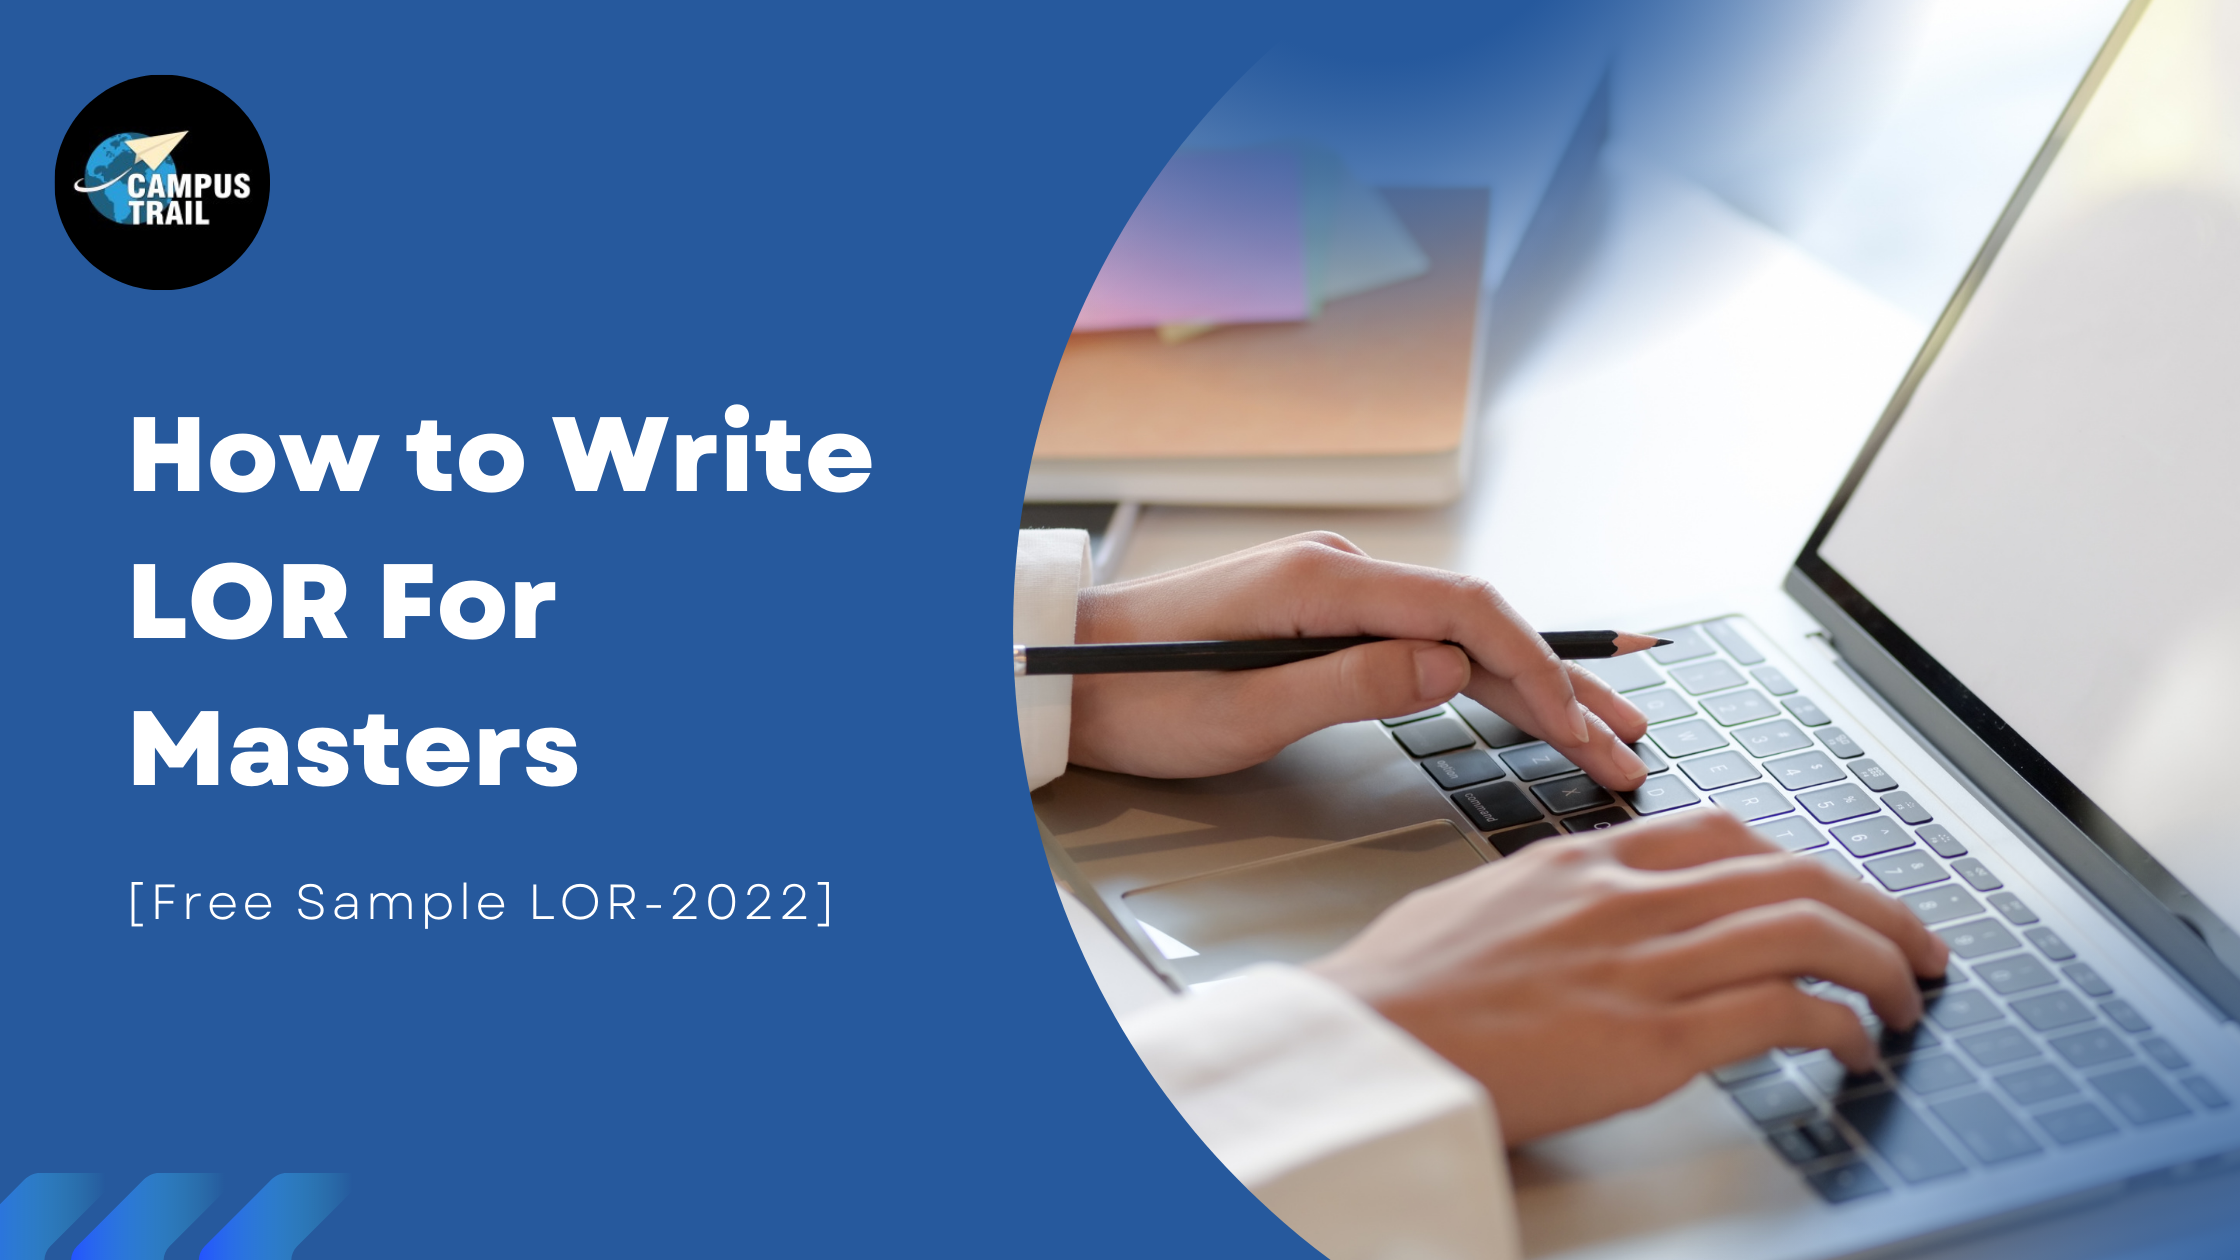 You are currently viewing How to Write LOR For Masters [Free Sample LOR-2022]